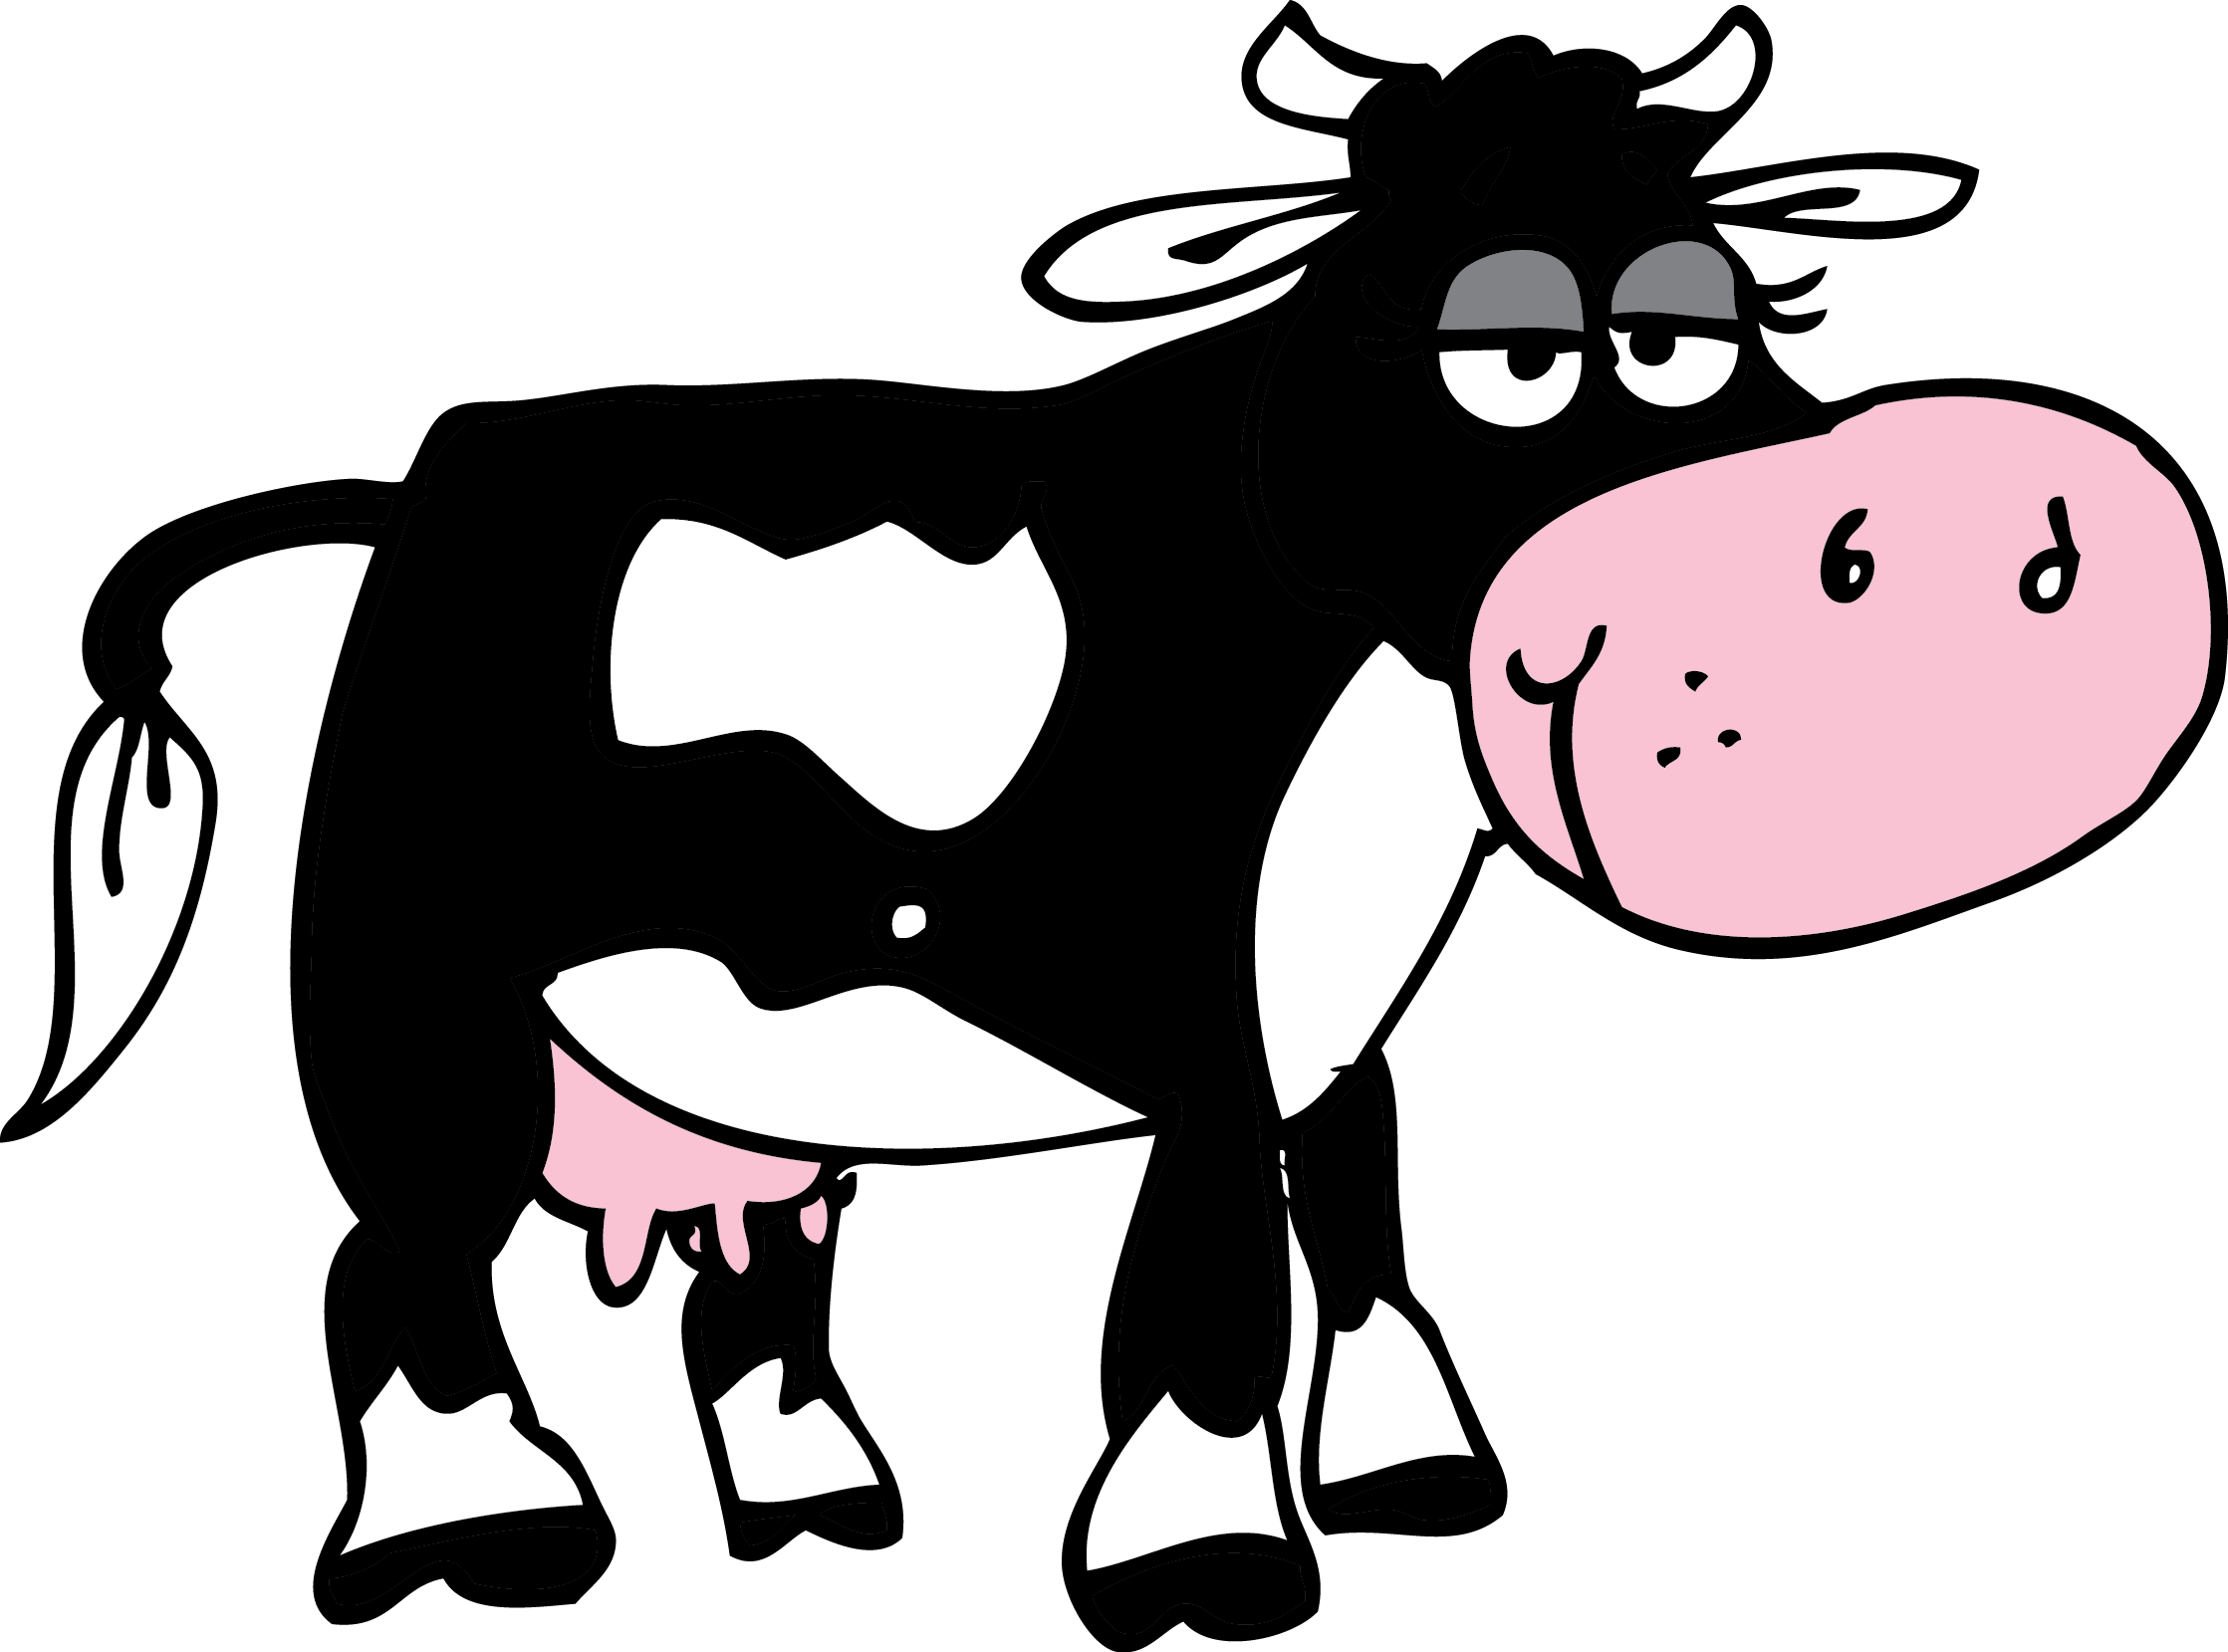 Cow Cartoon Pictures - Cliparts.co